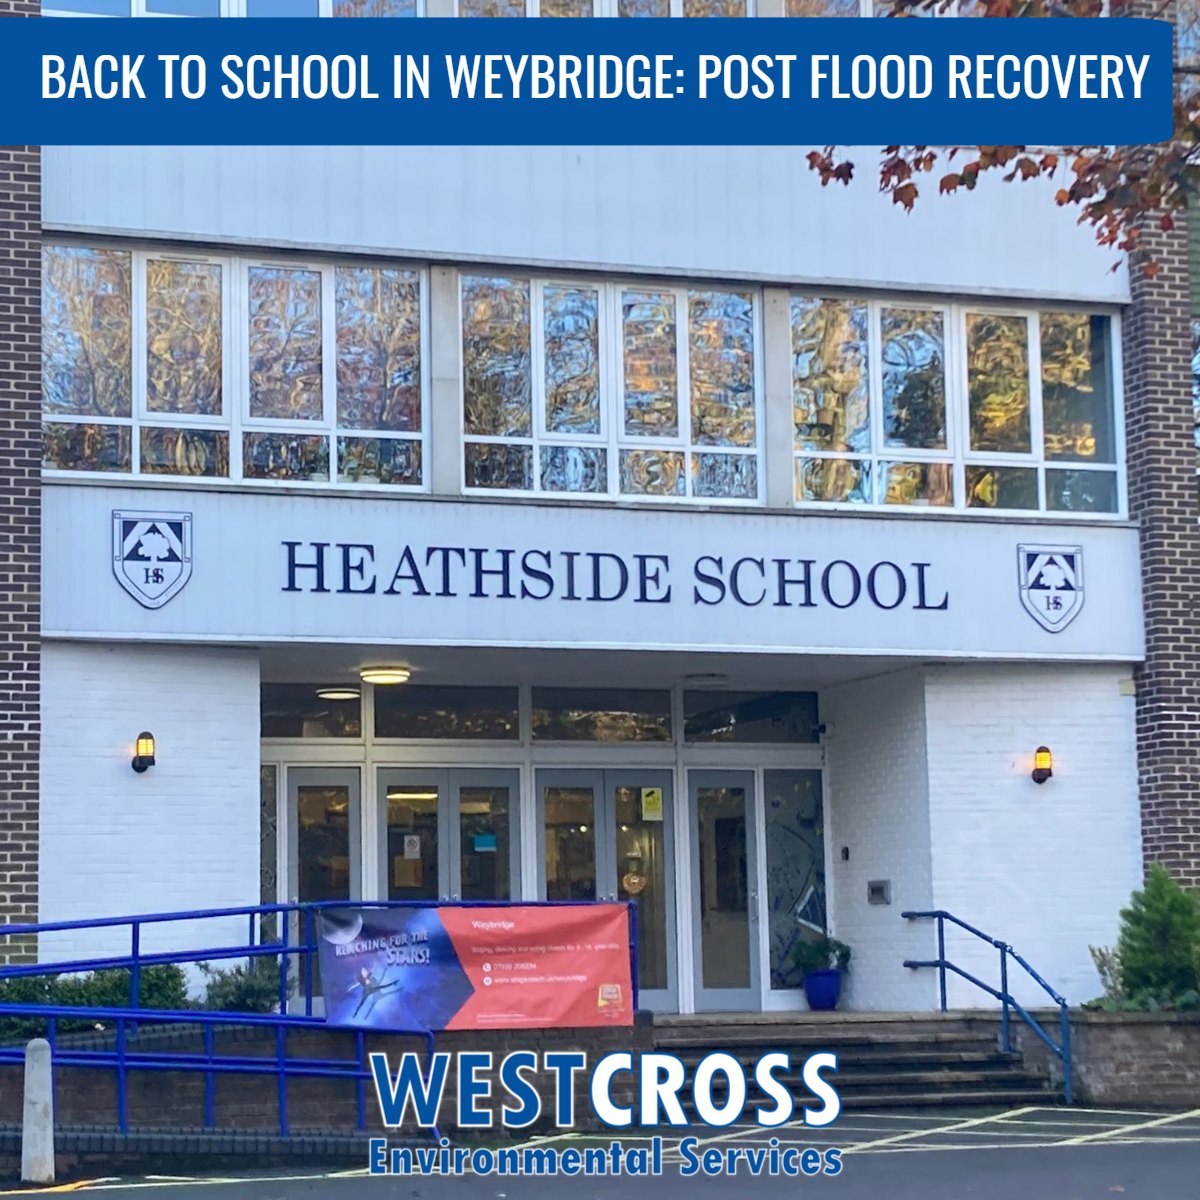 Back to School in Weybridge for Post for Flood Recovery Efforts